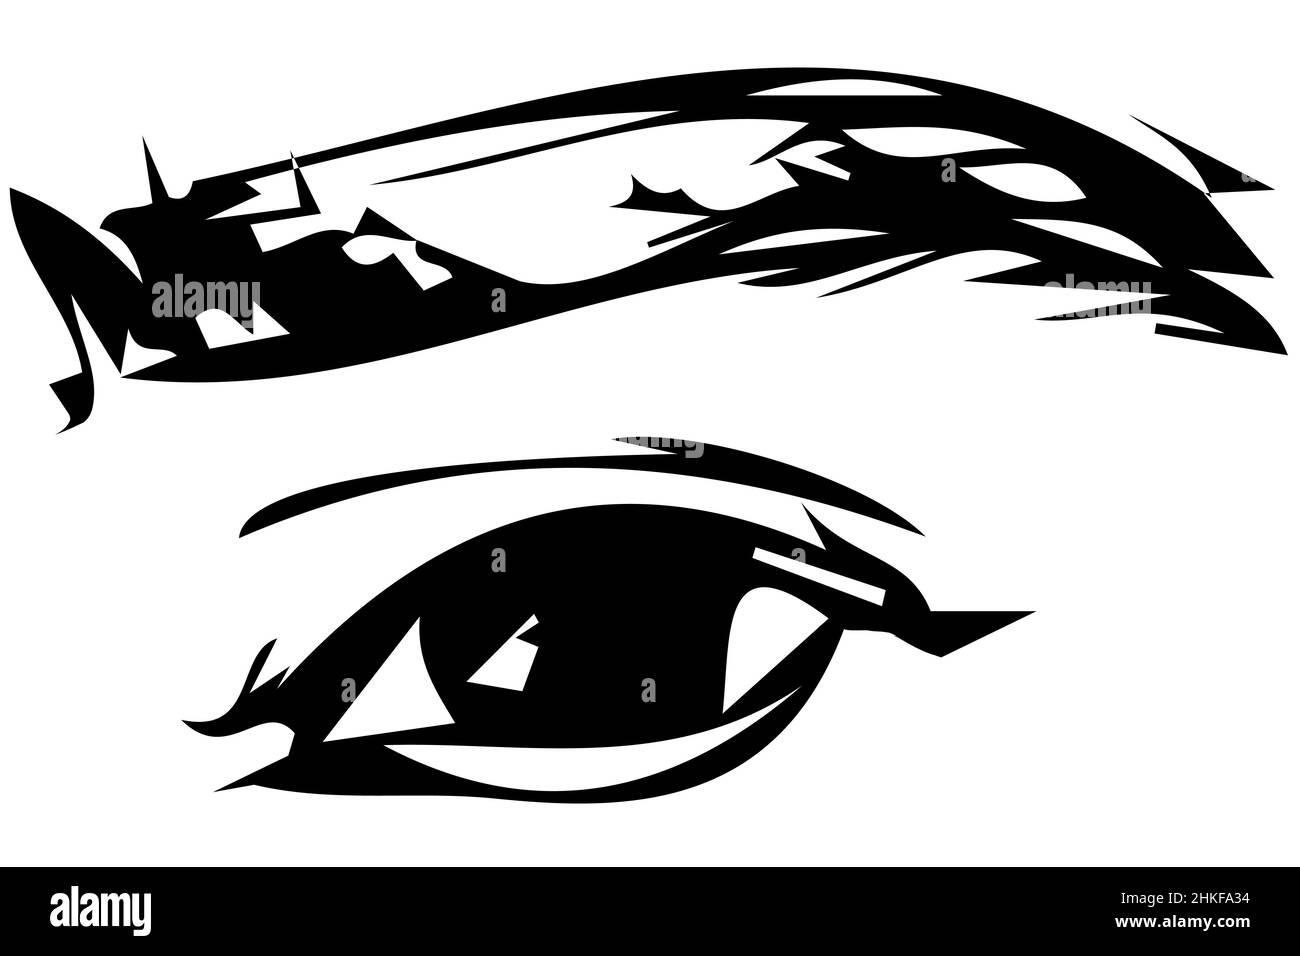 black and white vector sketch of a human eye and eyebro Stock Photo